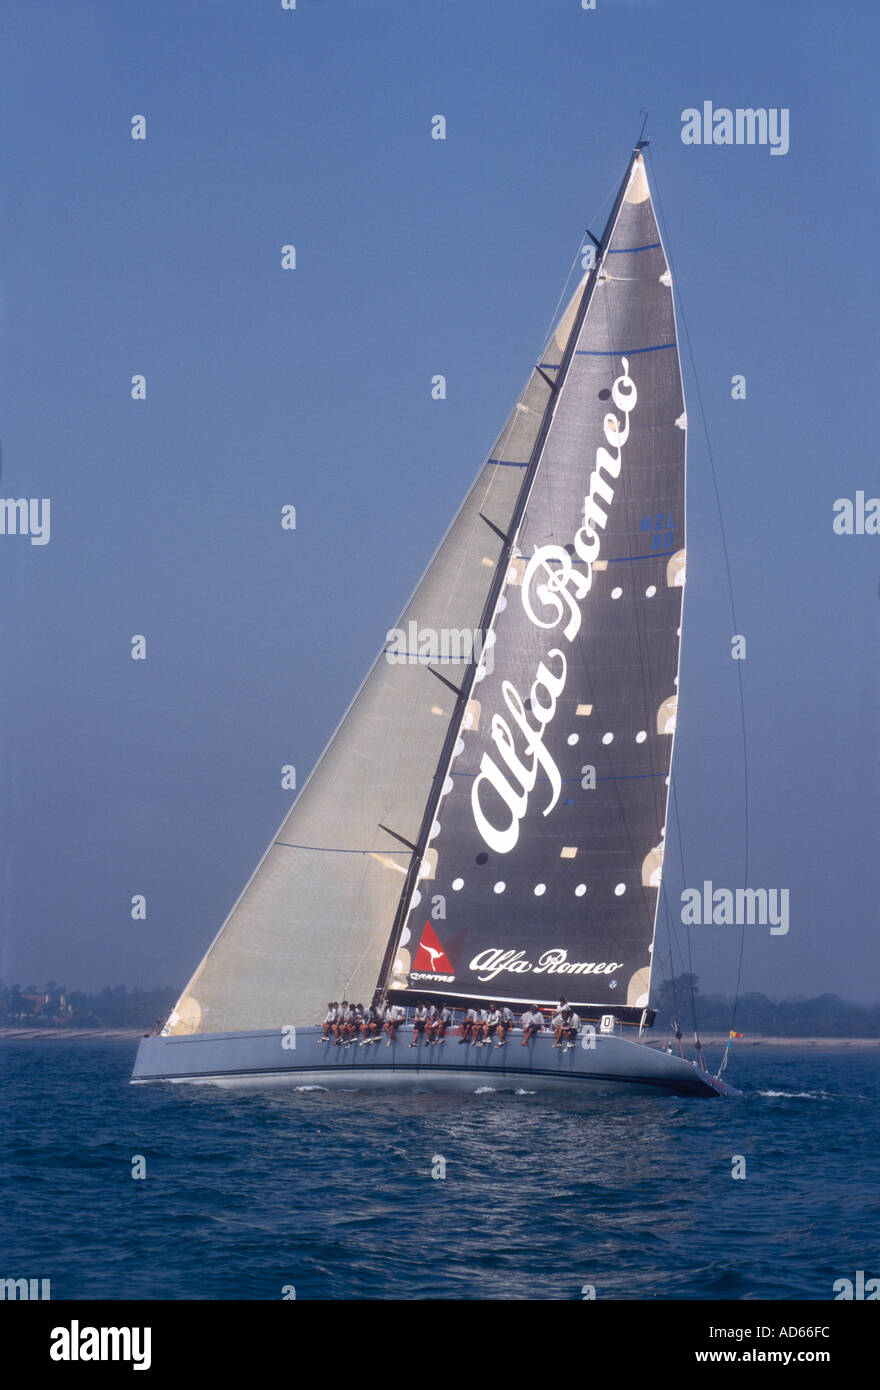 The Reichel Pugh Maxi design yacht Alfa Romeo racing off the Isle of Wight Hampshire England during Cowes Week Stock Photo